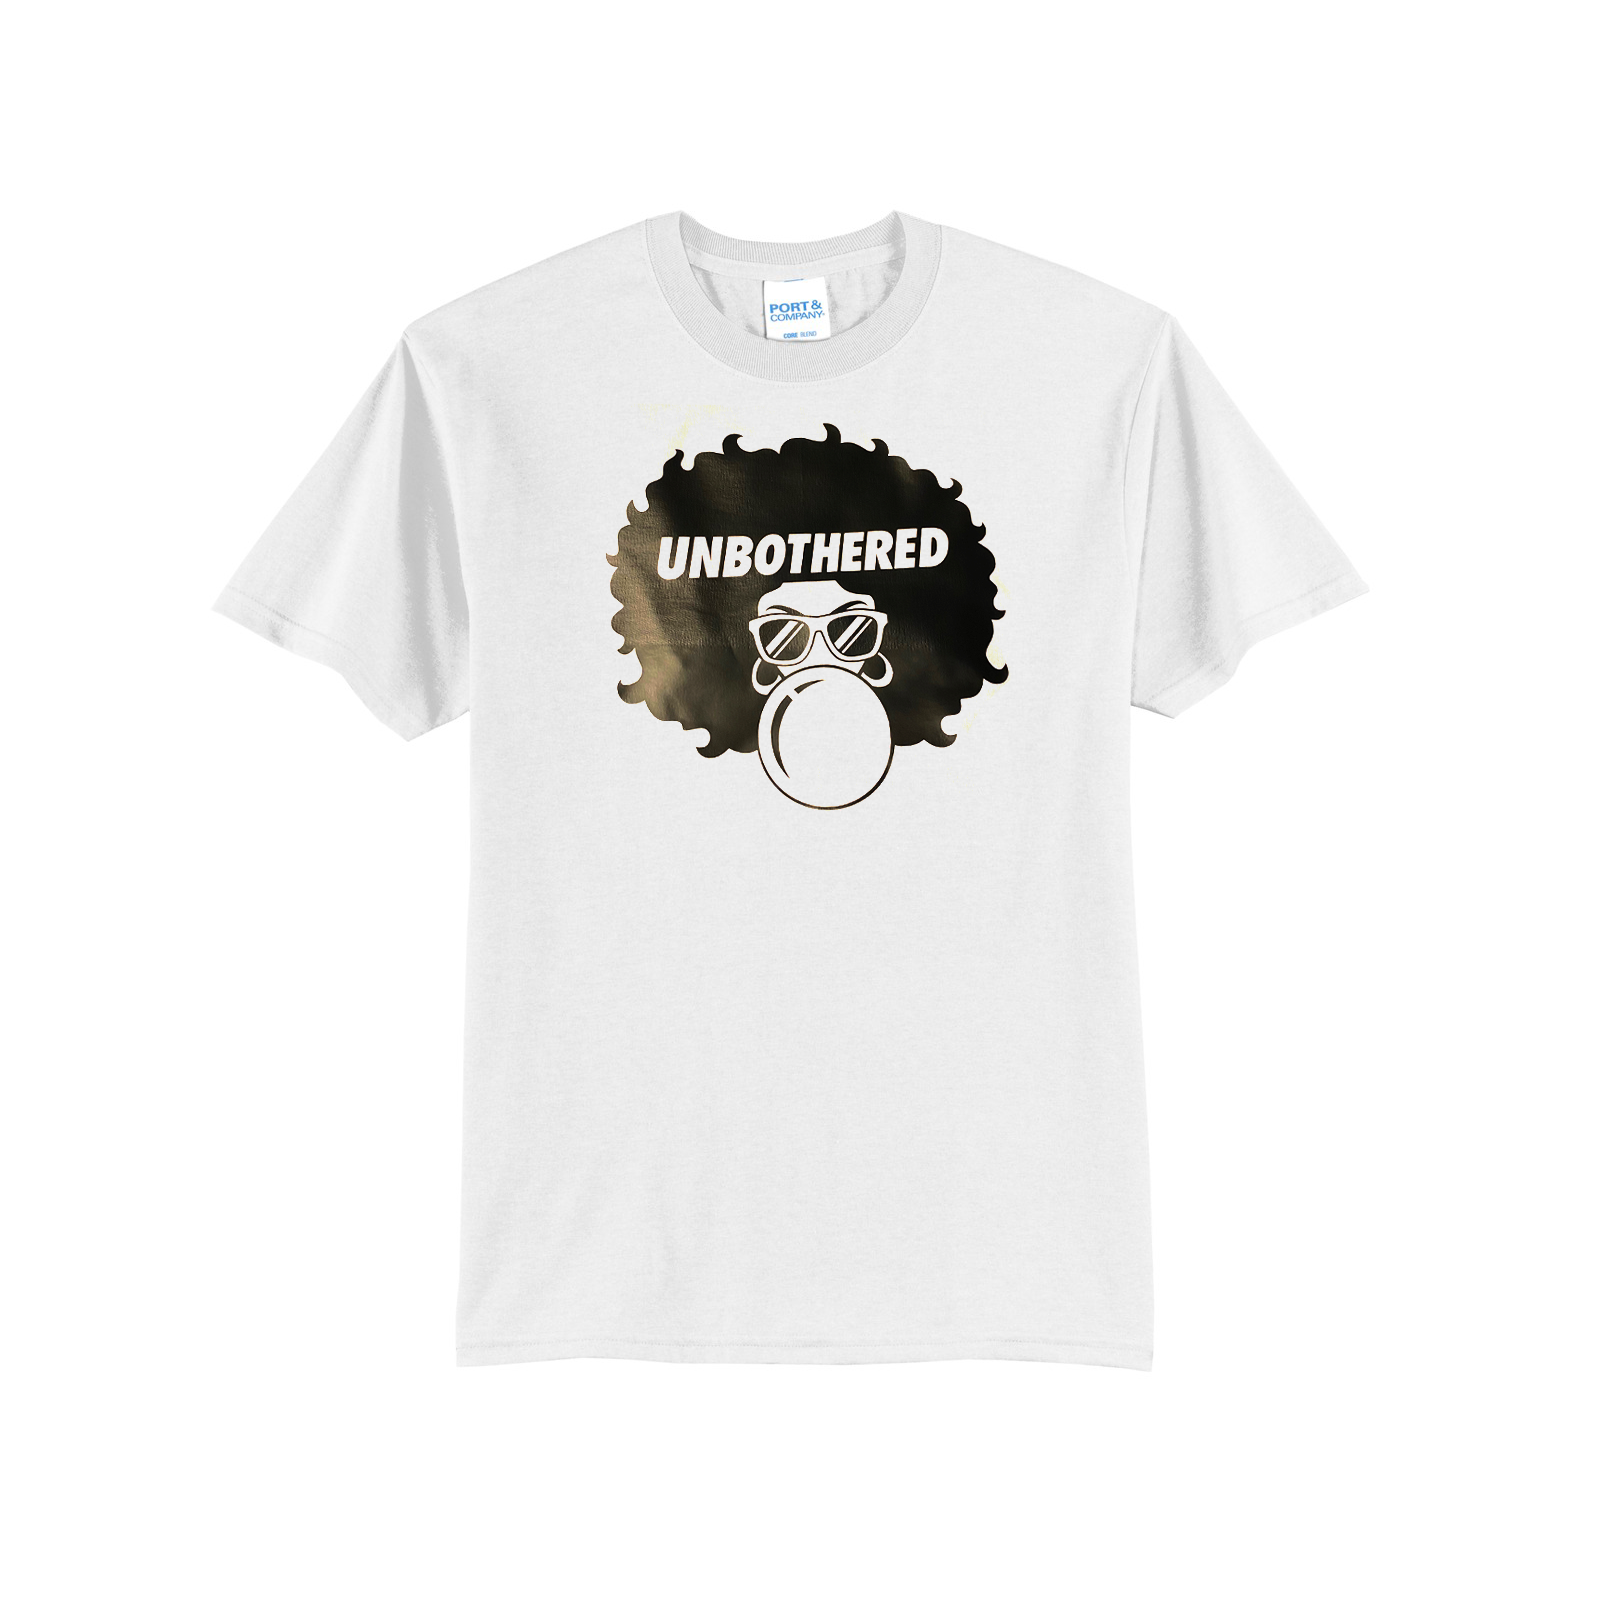 'Unbothered' Short Sleeve Tee